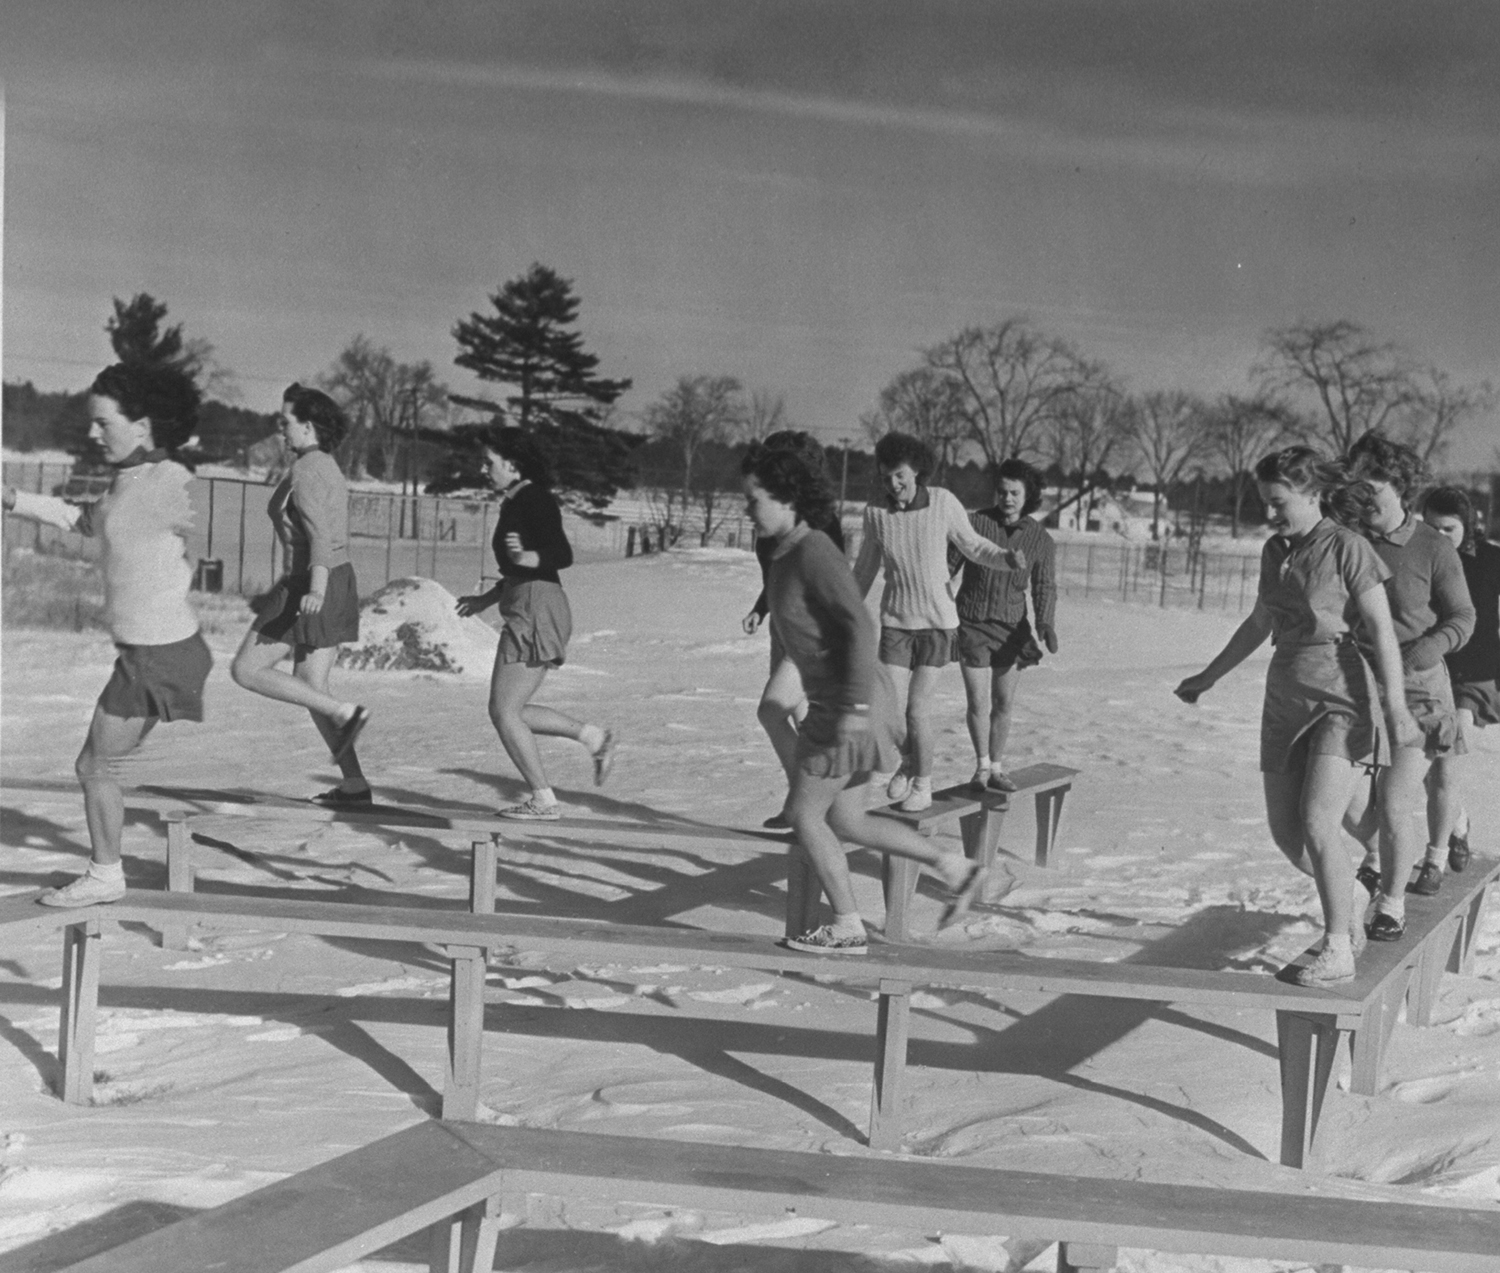 Univ. of New Hampshire coeds training in 1942